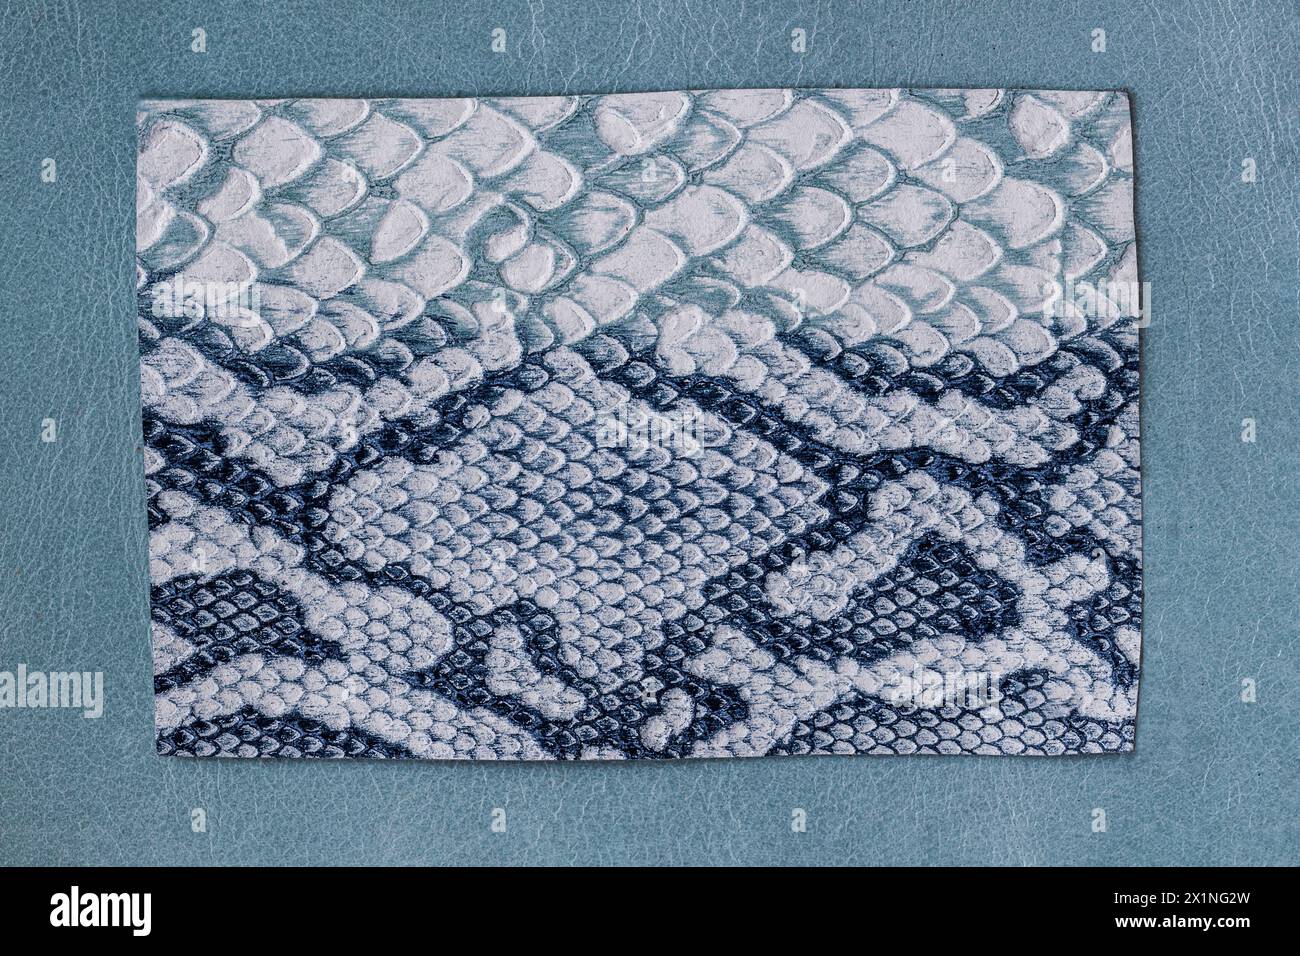 Blue and white snake skin, patterned background, reptile surface in frame Stock Photo